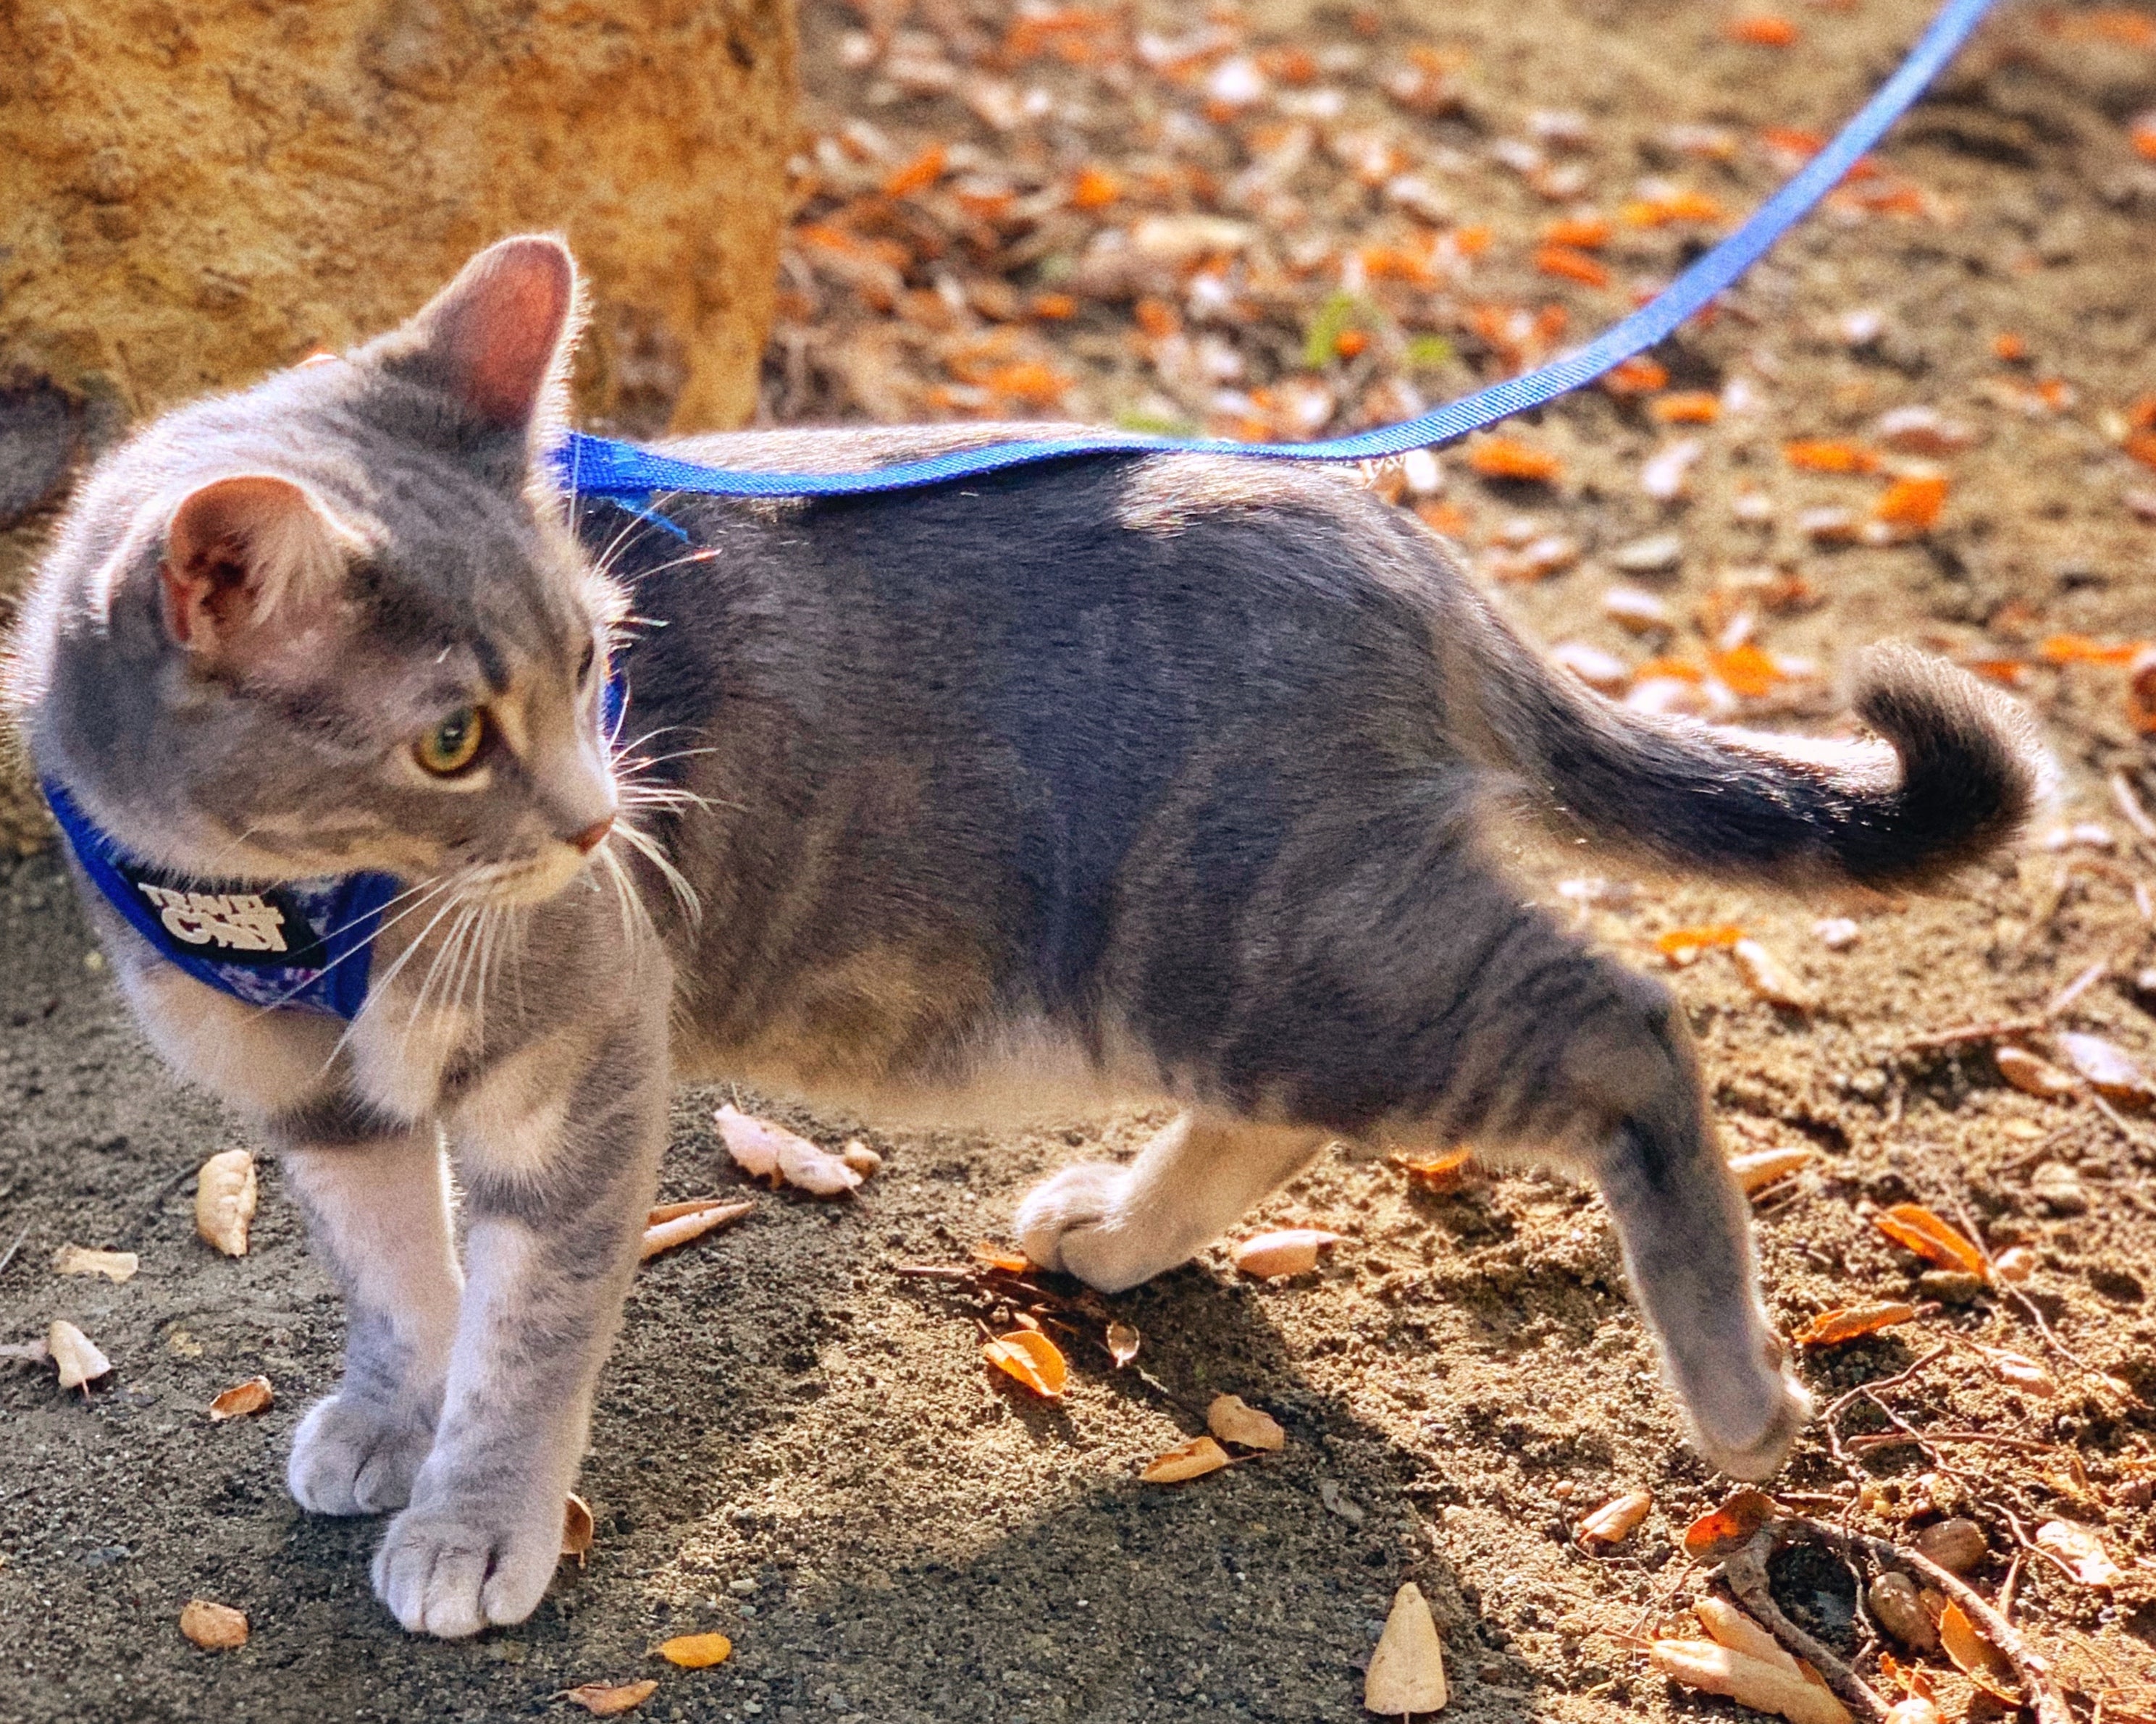 Travel Cat Tuesday: Luna, the Beginner Travel Kitty Eager to Explore